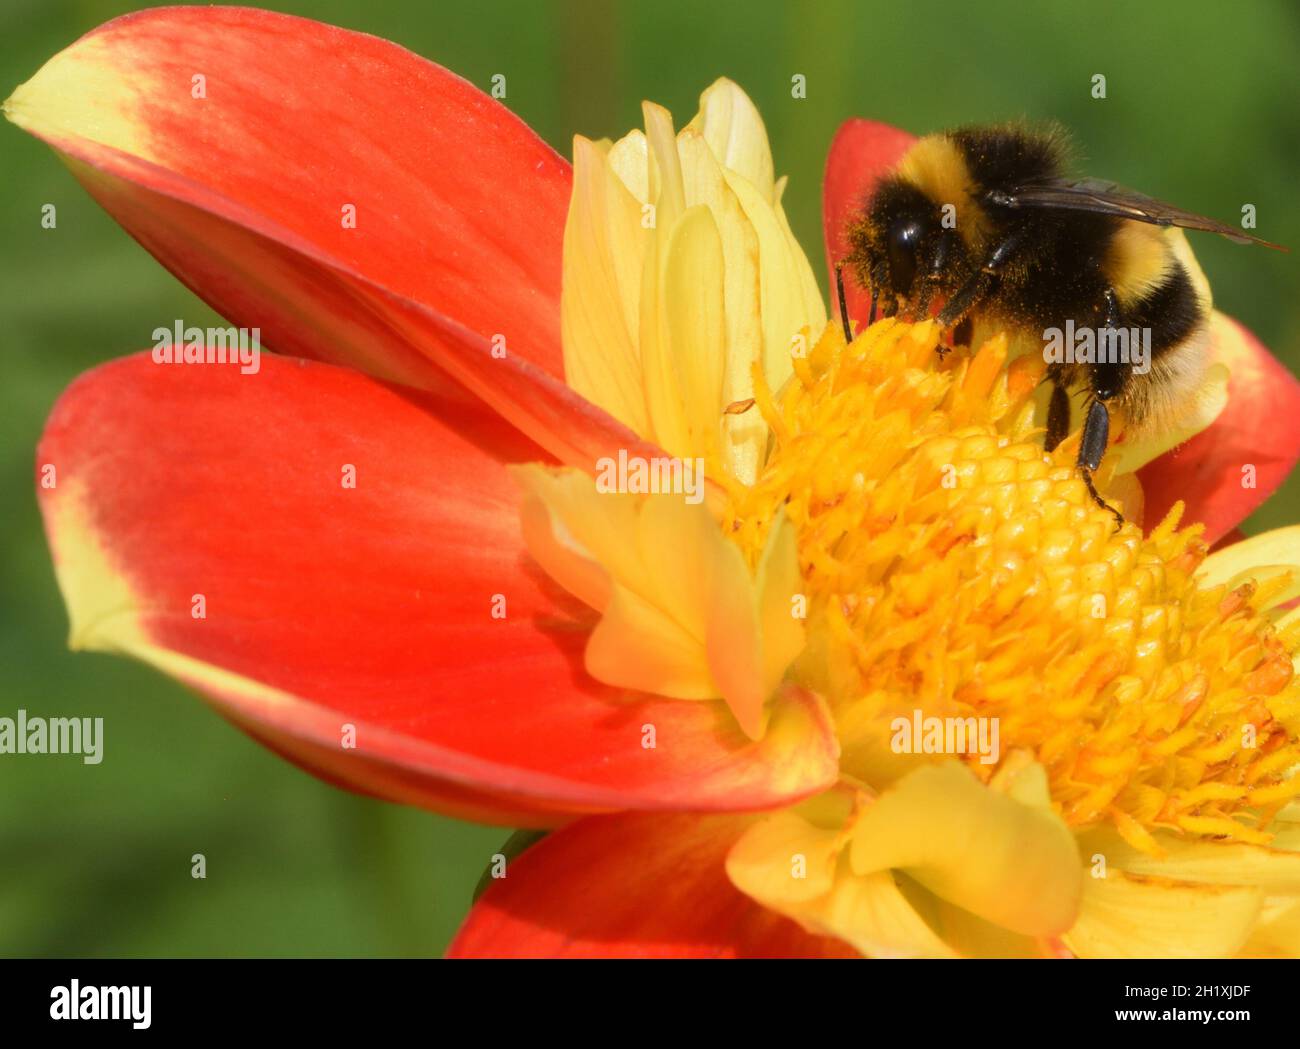 A buff-tailed bumblebee or large earth bumblebee (Bombus terrestris) forages for nectar and pollen in an orange and yellow open flowered dahlia flower Stock Photo